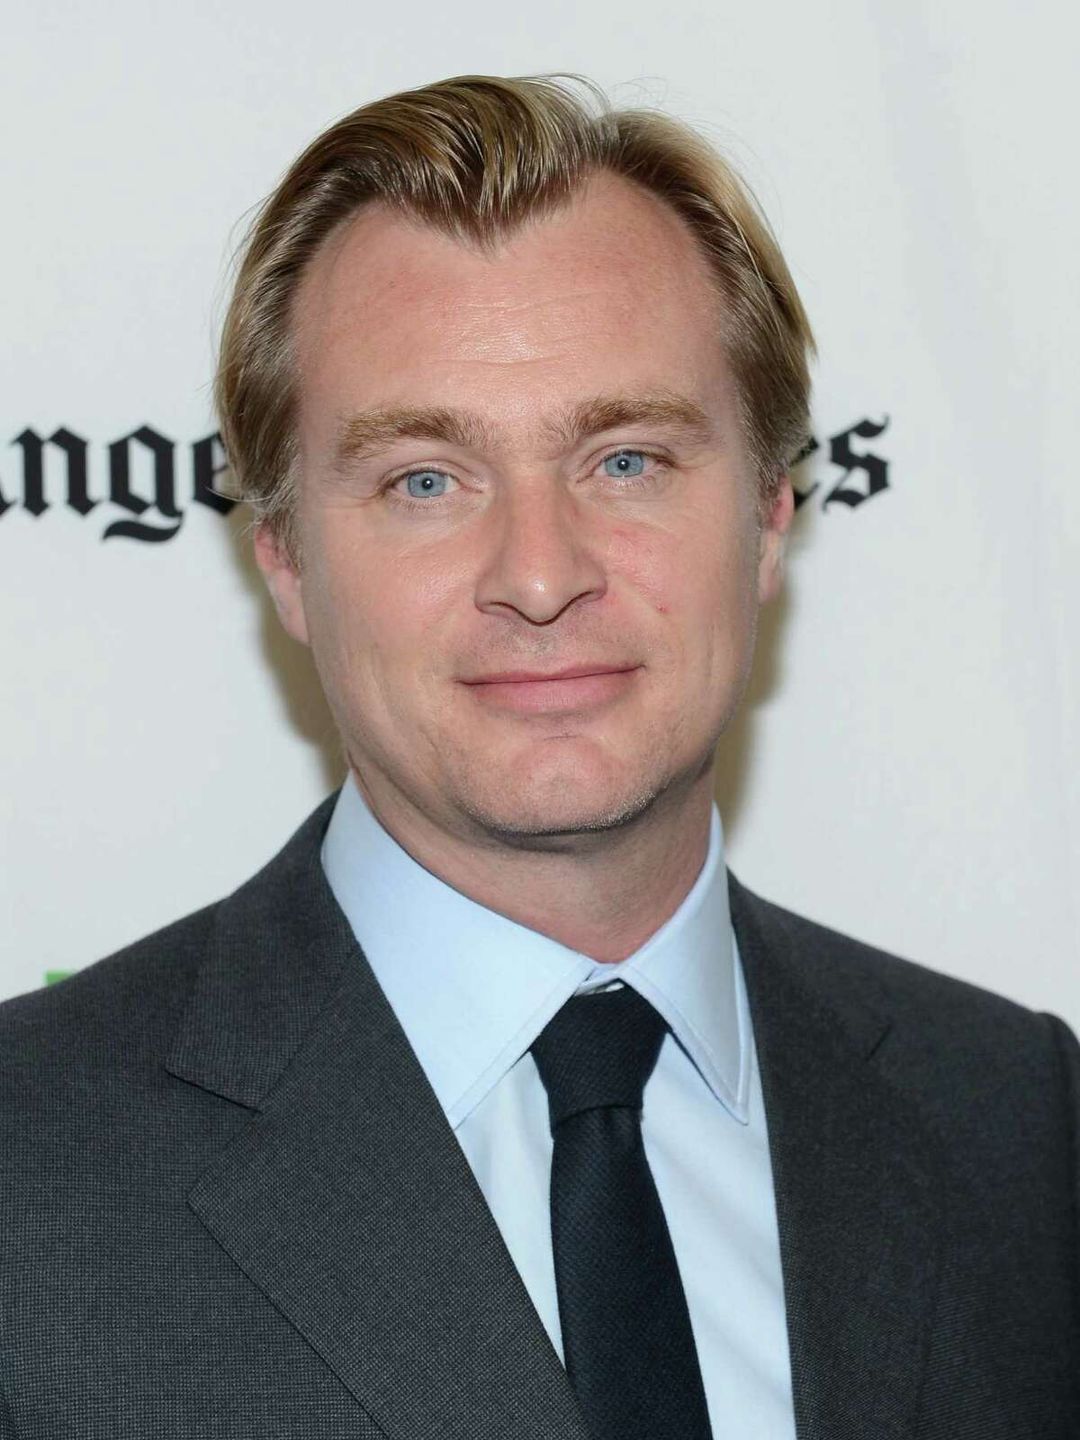 Christopher Nolan in real life